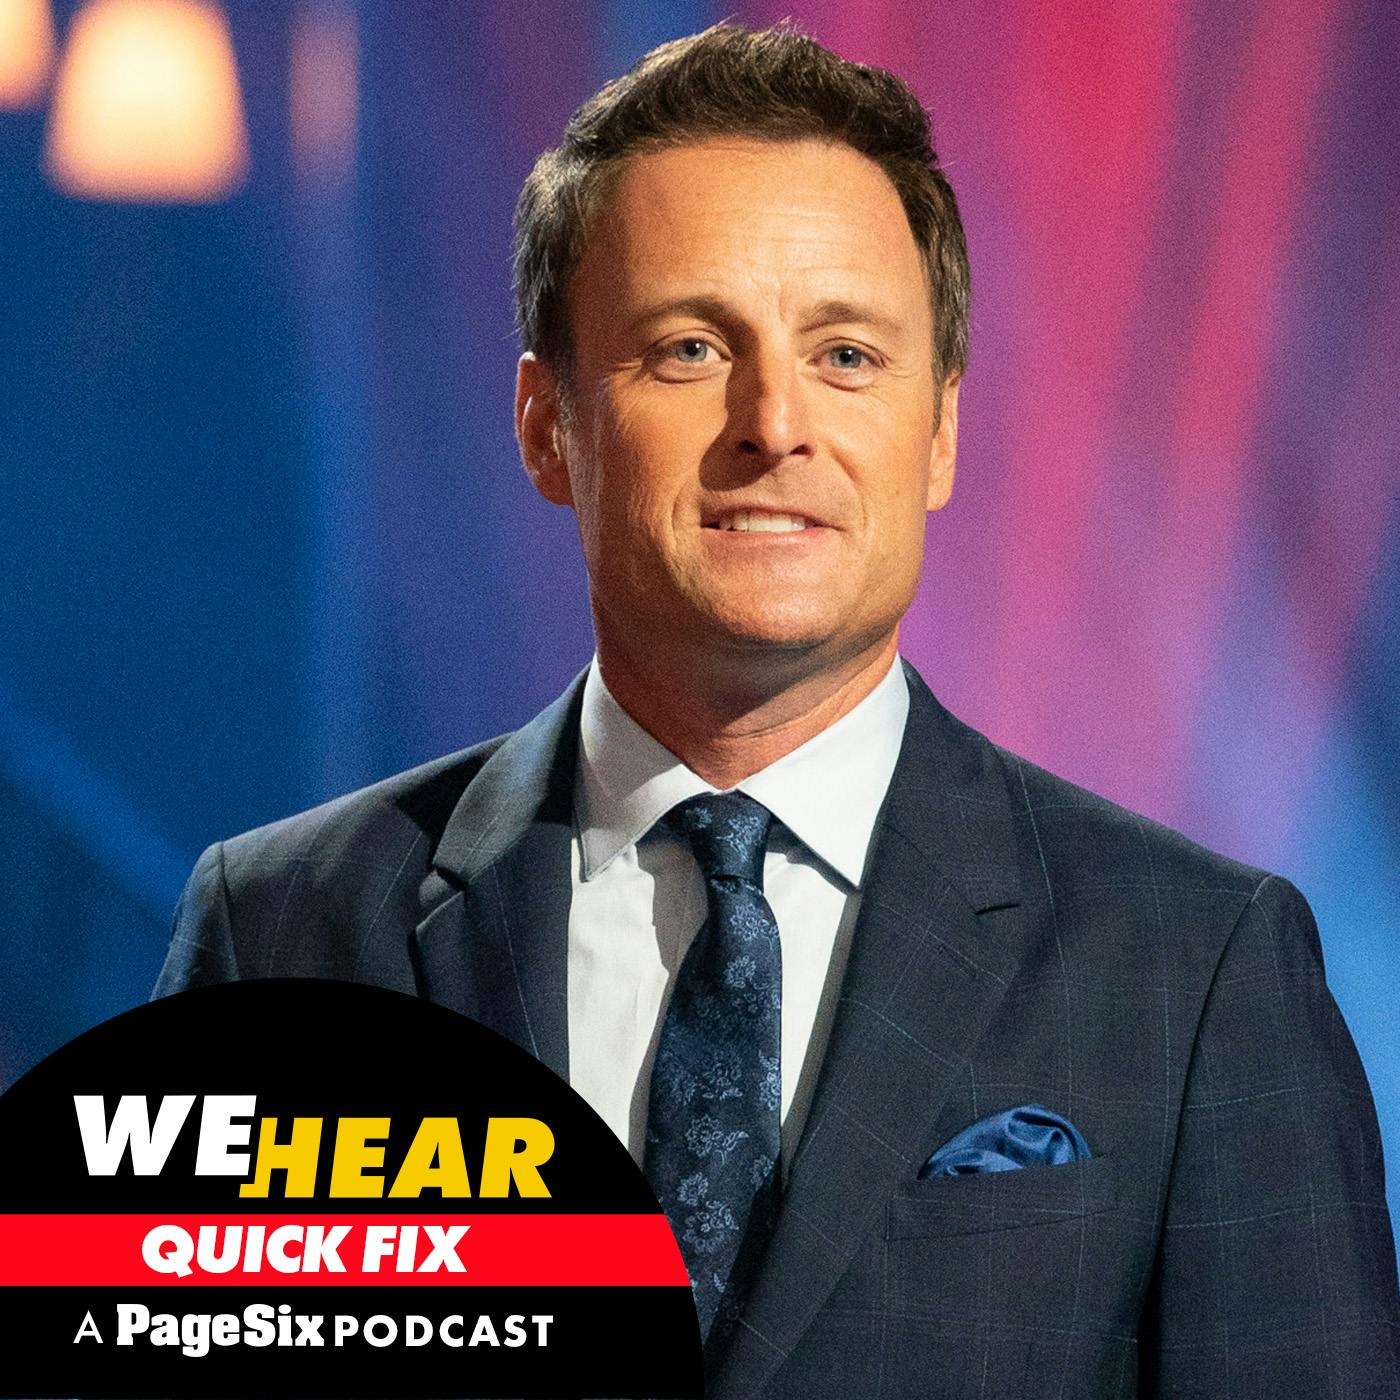 Chris Harrison calls 'The Bachelor' franchise 'very toxic' nearly 2 years after exit, more